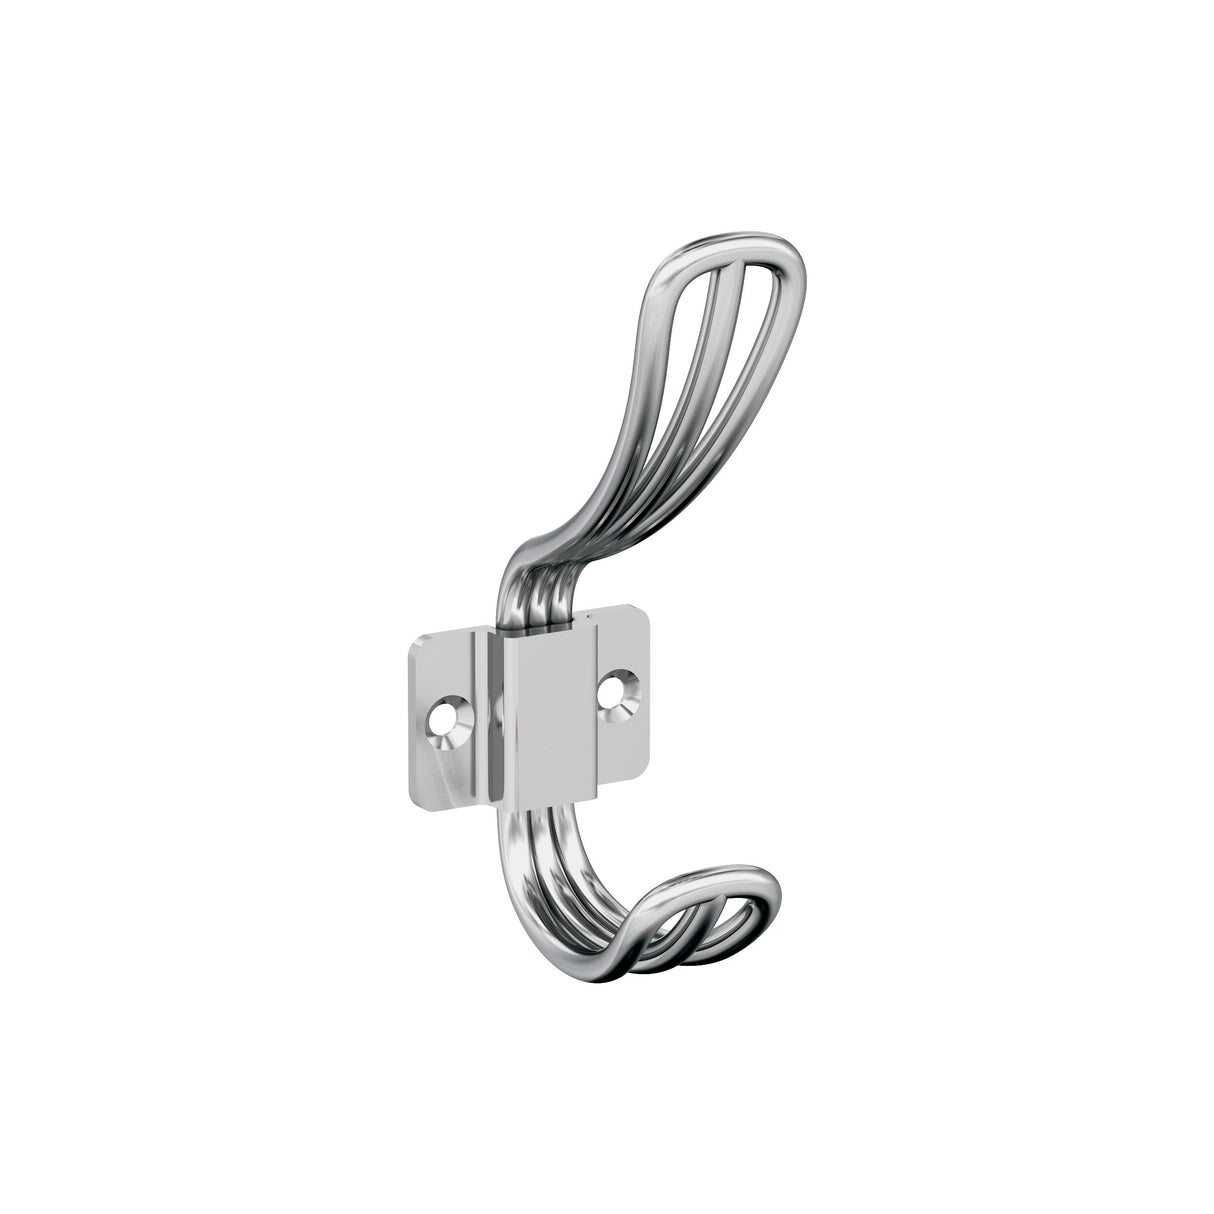 Amerock H3700626 Vinland Double Prong Decorative Wall Hook Polished Chrome Hook for Coats, Hats, Backpacks, Bags Hooks for Bathroom, Bedroom, Closet, Entryway, Laundry Room, Office